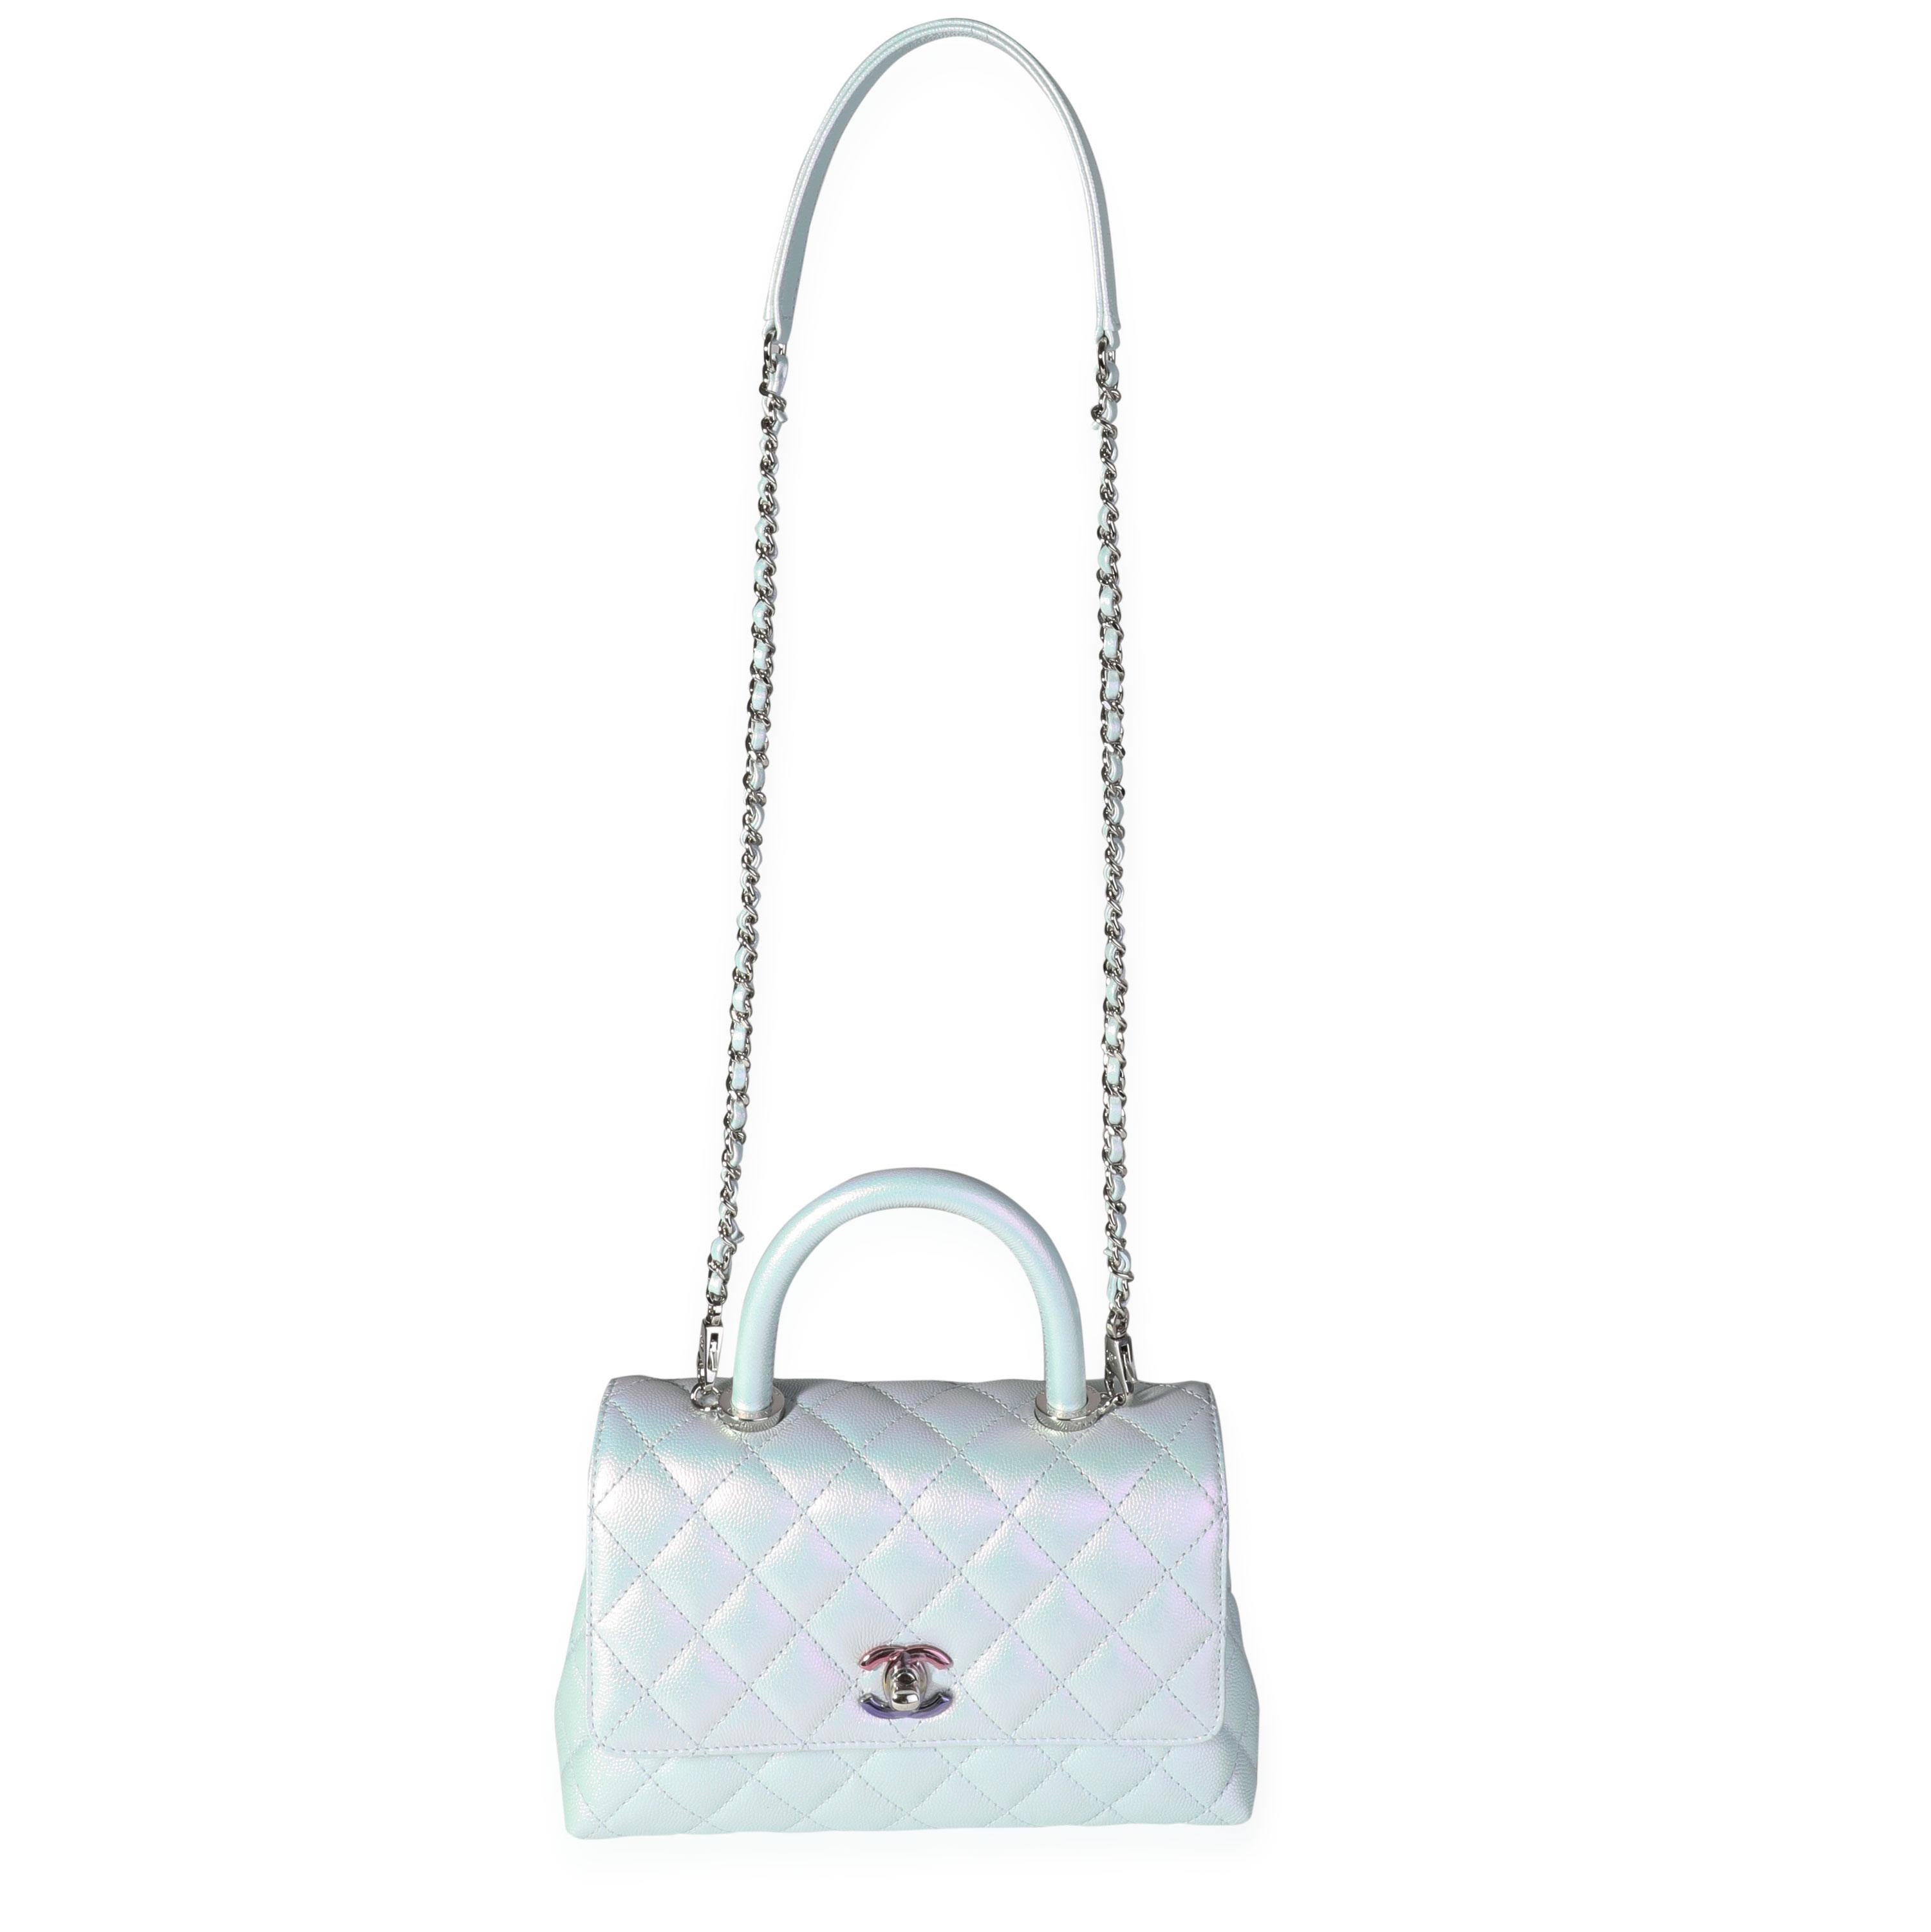 Listing Title: Chanel Light Blue Iridescent Quilted Caviar Small Coco Top Handle Bag
SKU: 117767
Condition: Pre-owned (3000)
Handbag Condition: Mint
Condition Comments: Mint Condition. Plastic on hardware. No visible signs of wear. Final